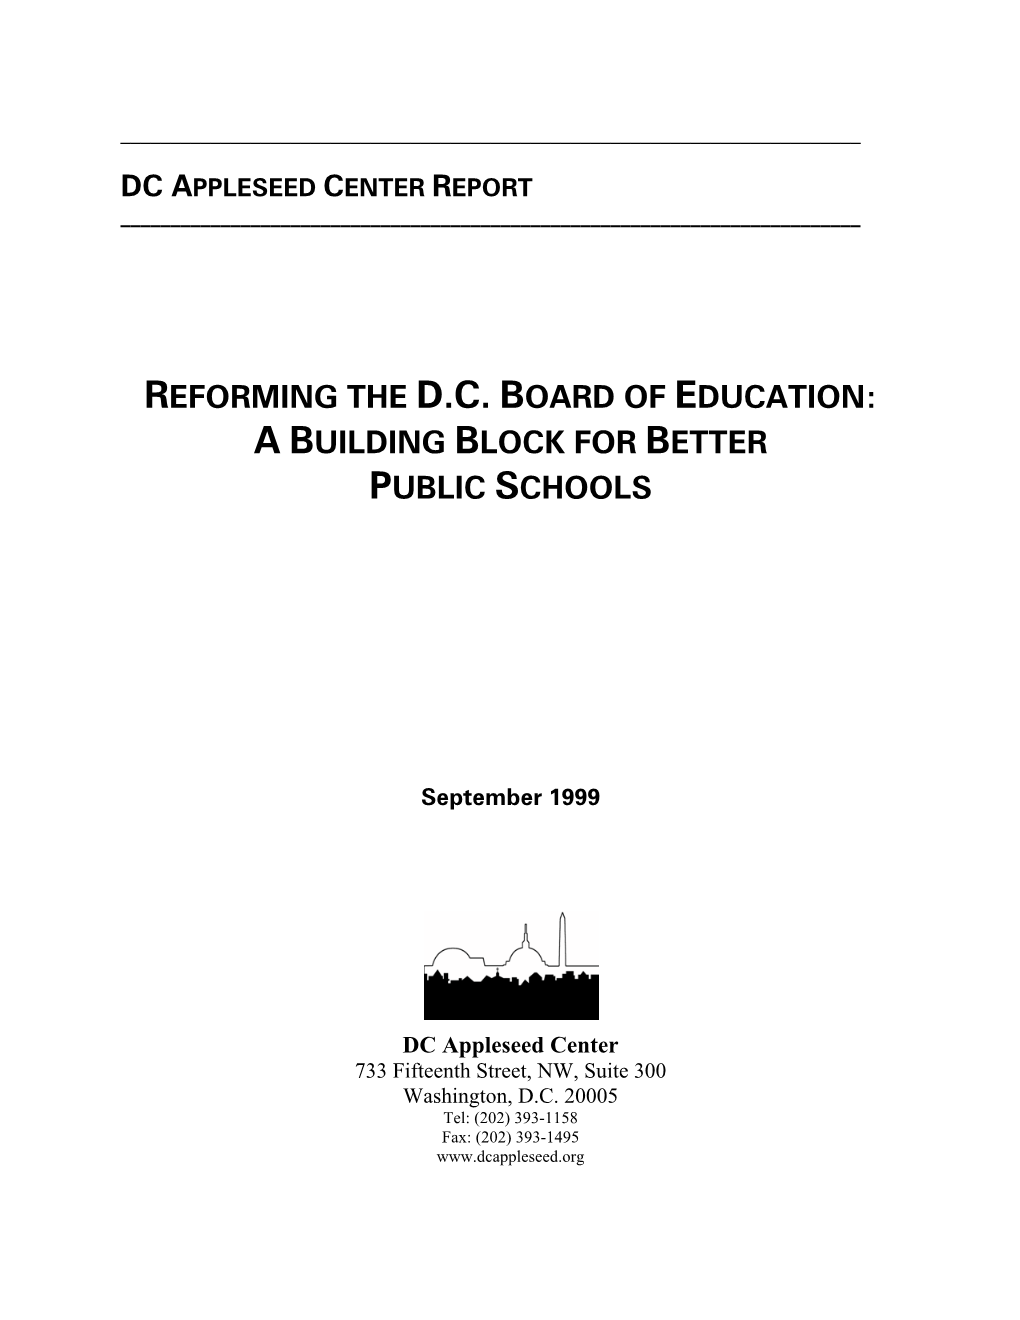 Reforming the Dc Board of Education